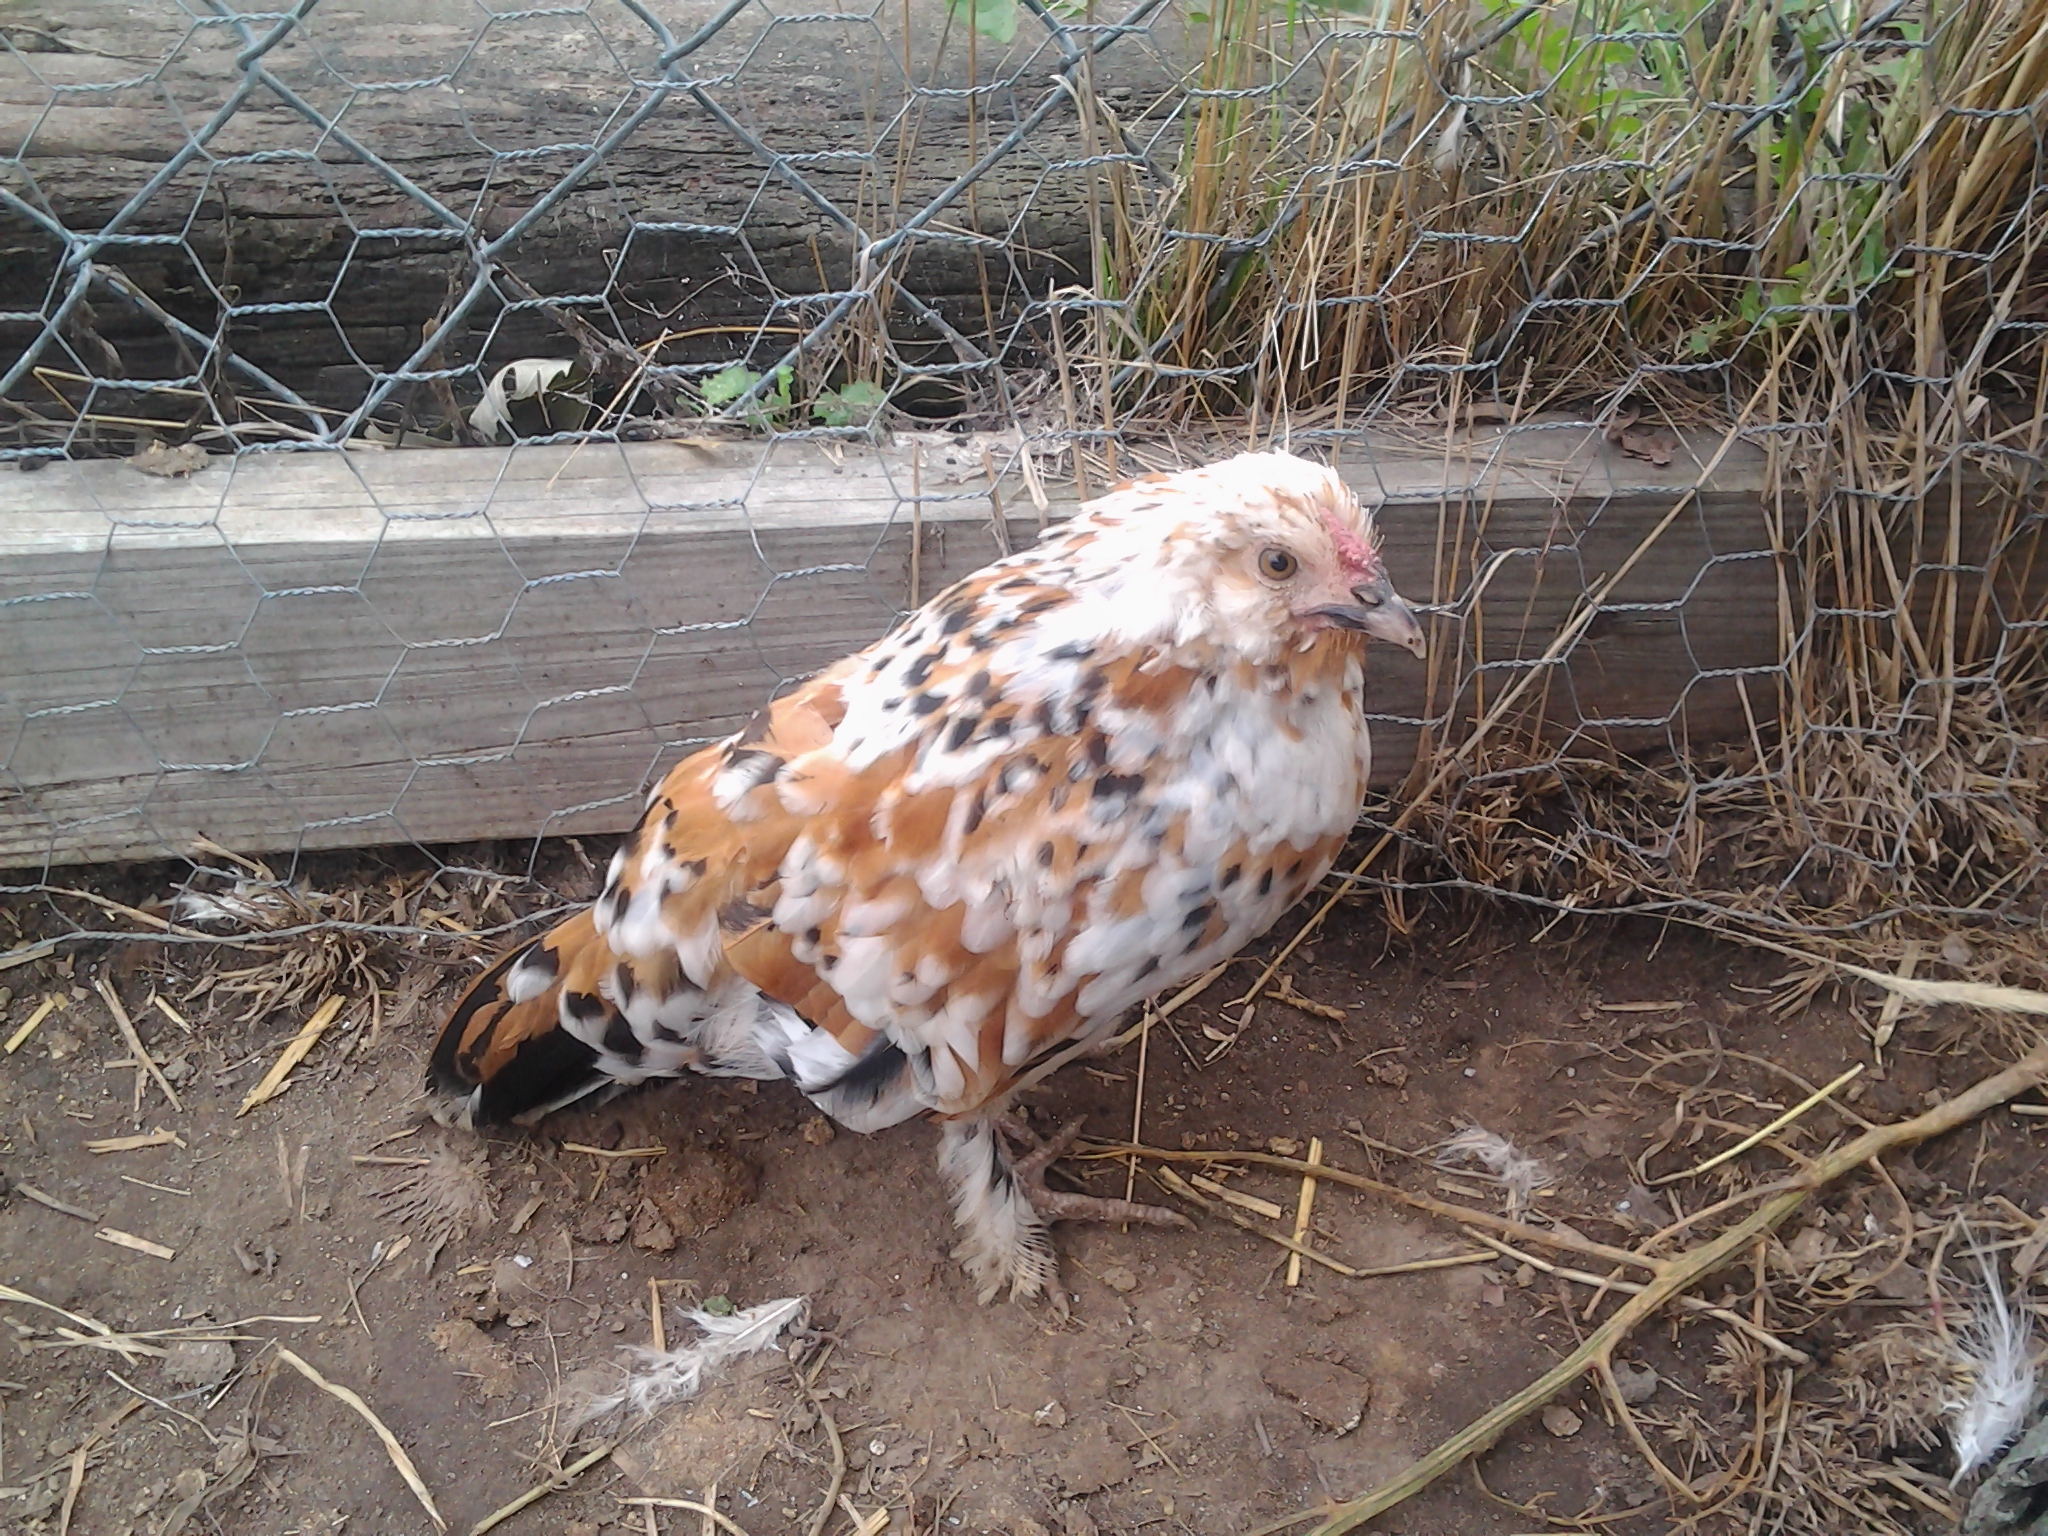 Booted Bantam Rooster. He has grown alot since this picture tho.